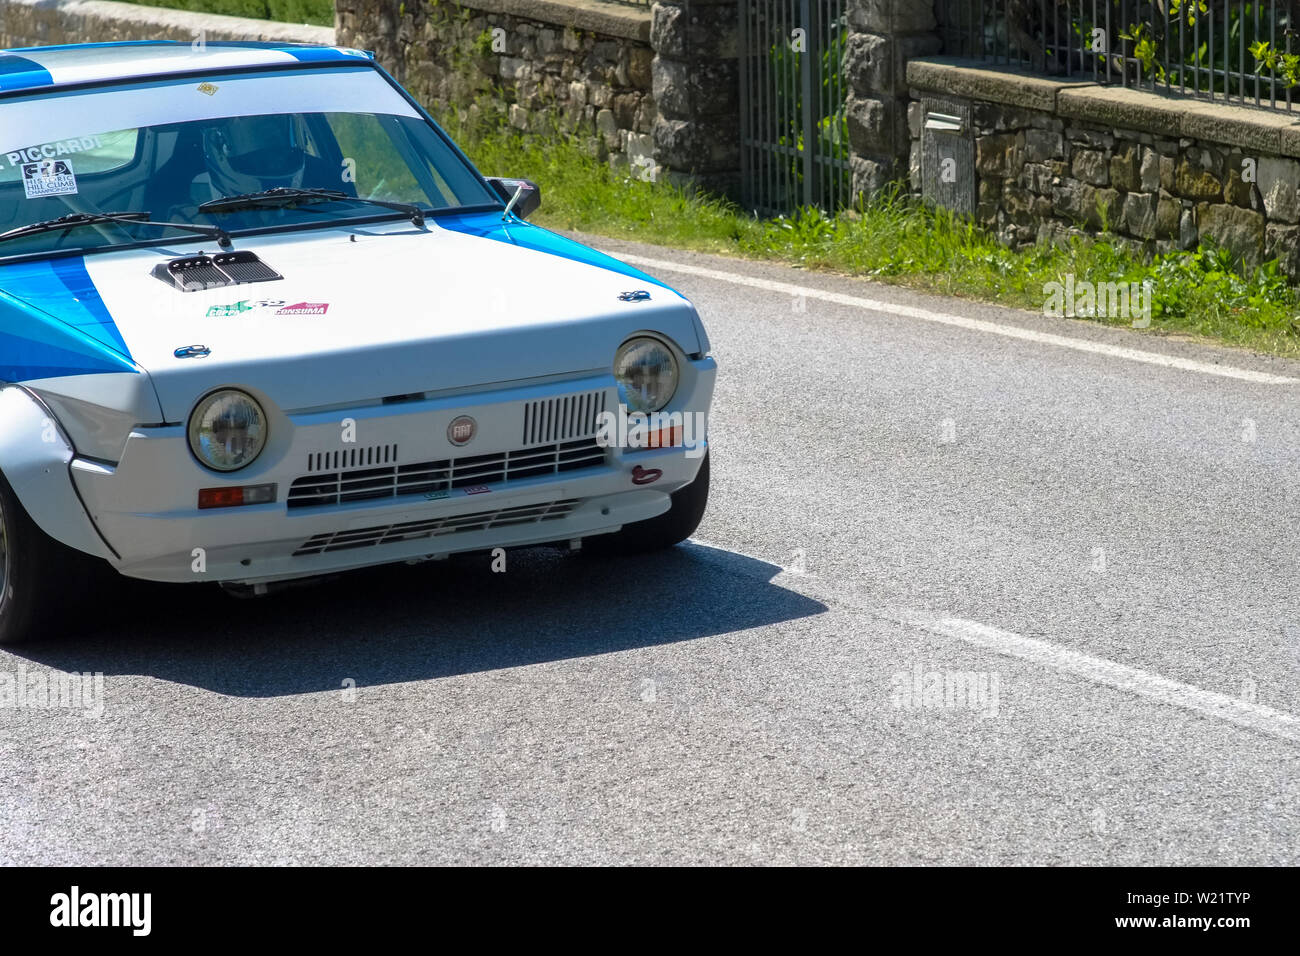 19th century old Fiat Ritmo car competes for the main race with a countryside landscape around the track. Stock Photo